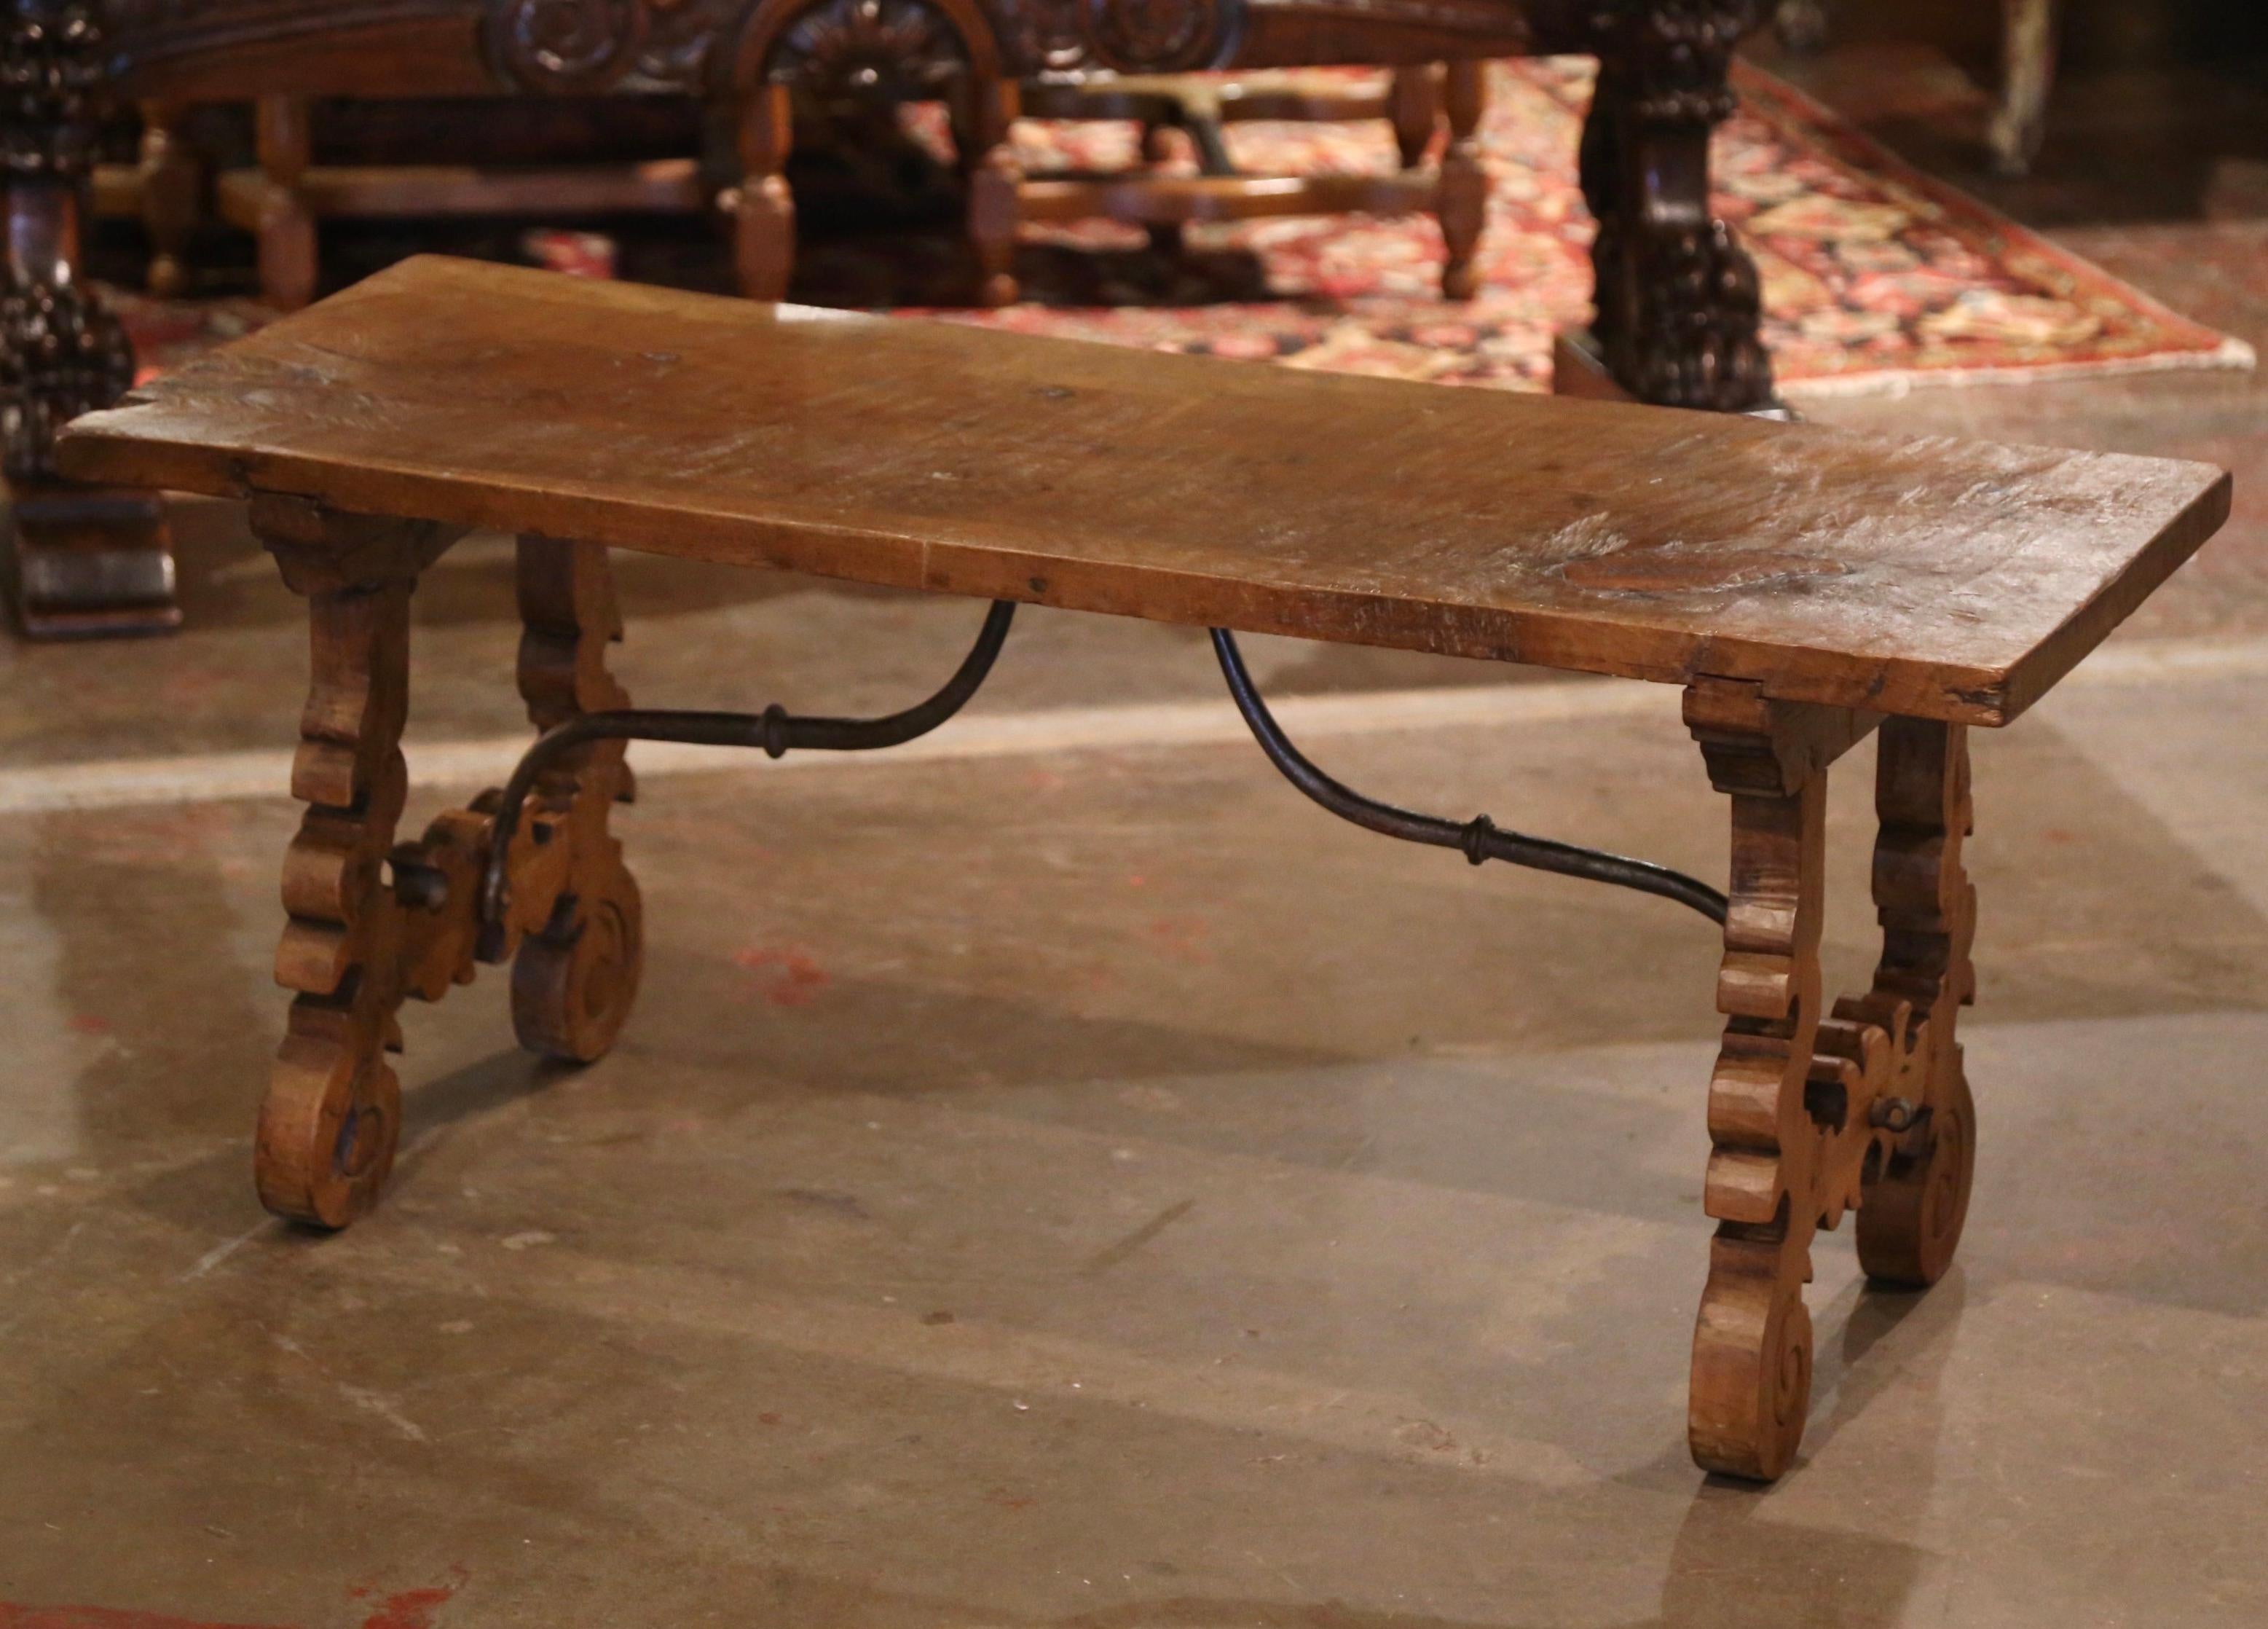 Crafted in Spain circa 1780, and built of solid walnut, the rectangular antique trestle coffee table stands on two carved scrolled legs joined together with a forged iron stretcher; the top is built with a single plank of walnut. The long cocktail